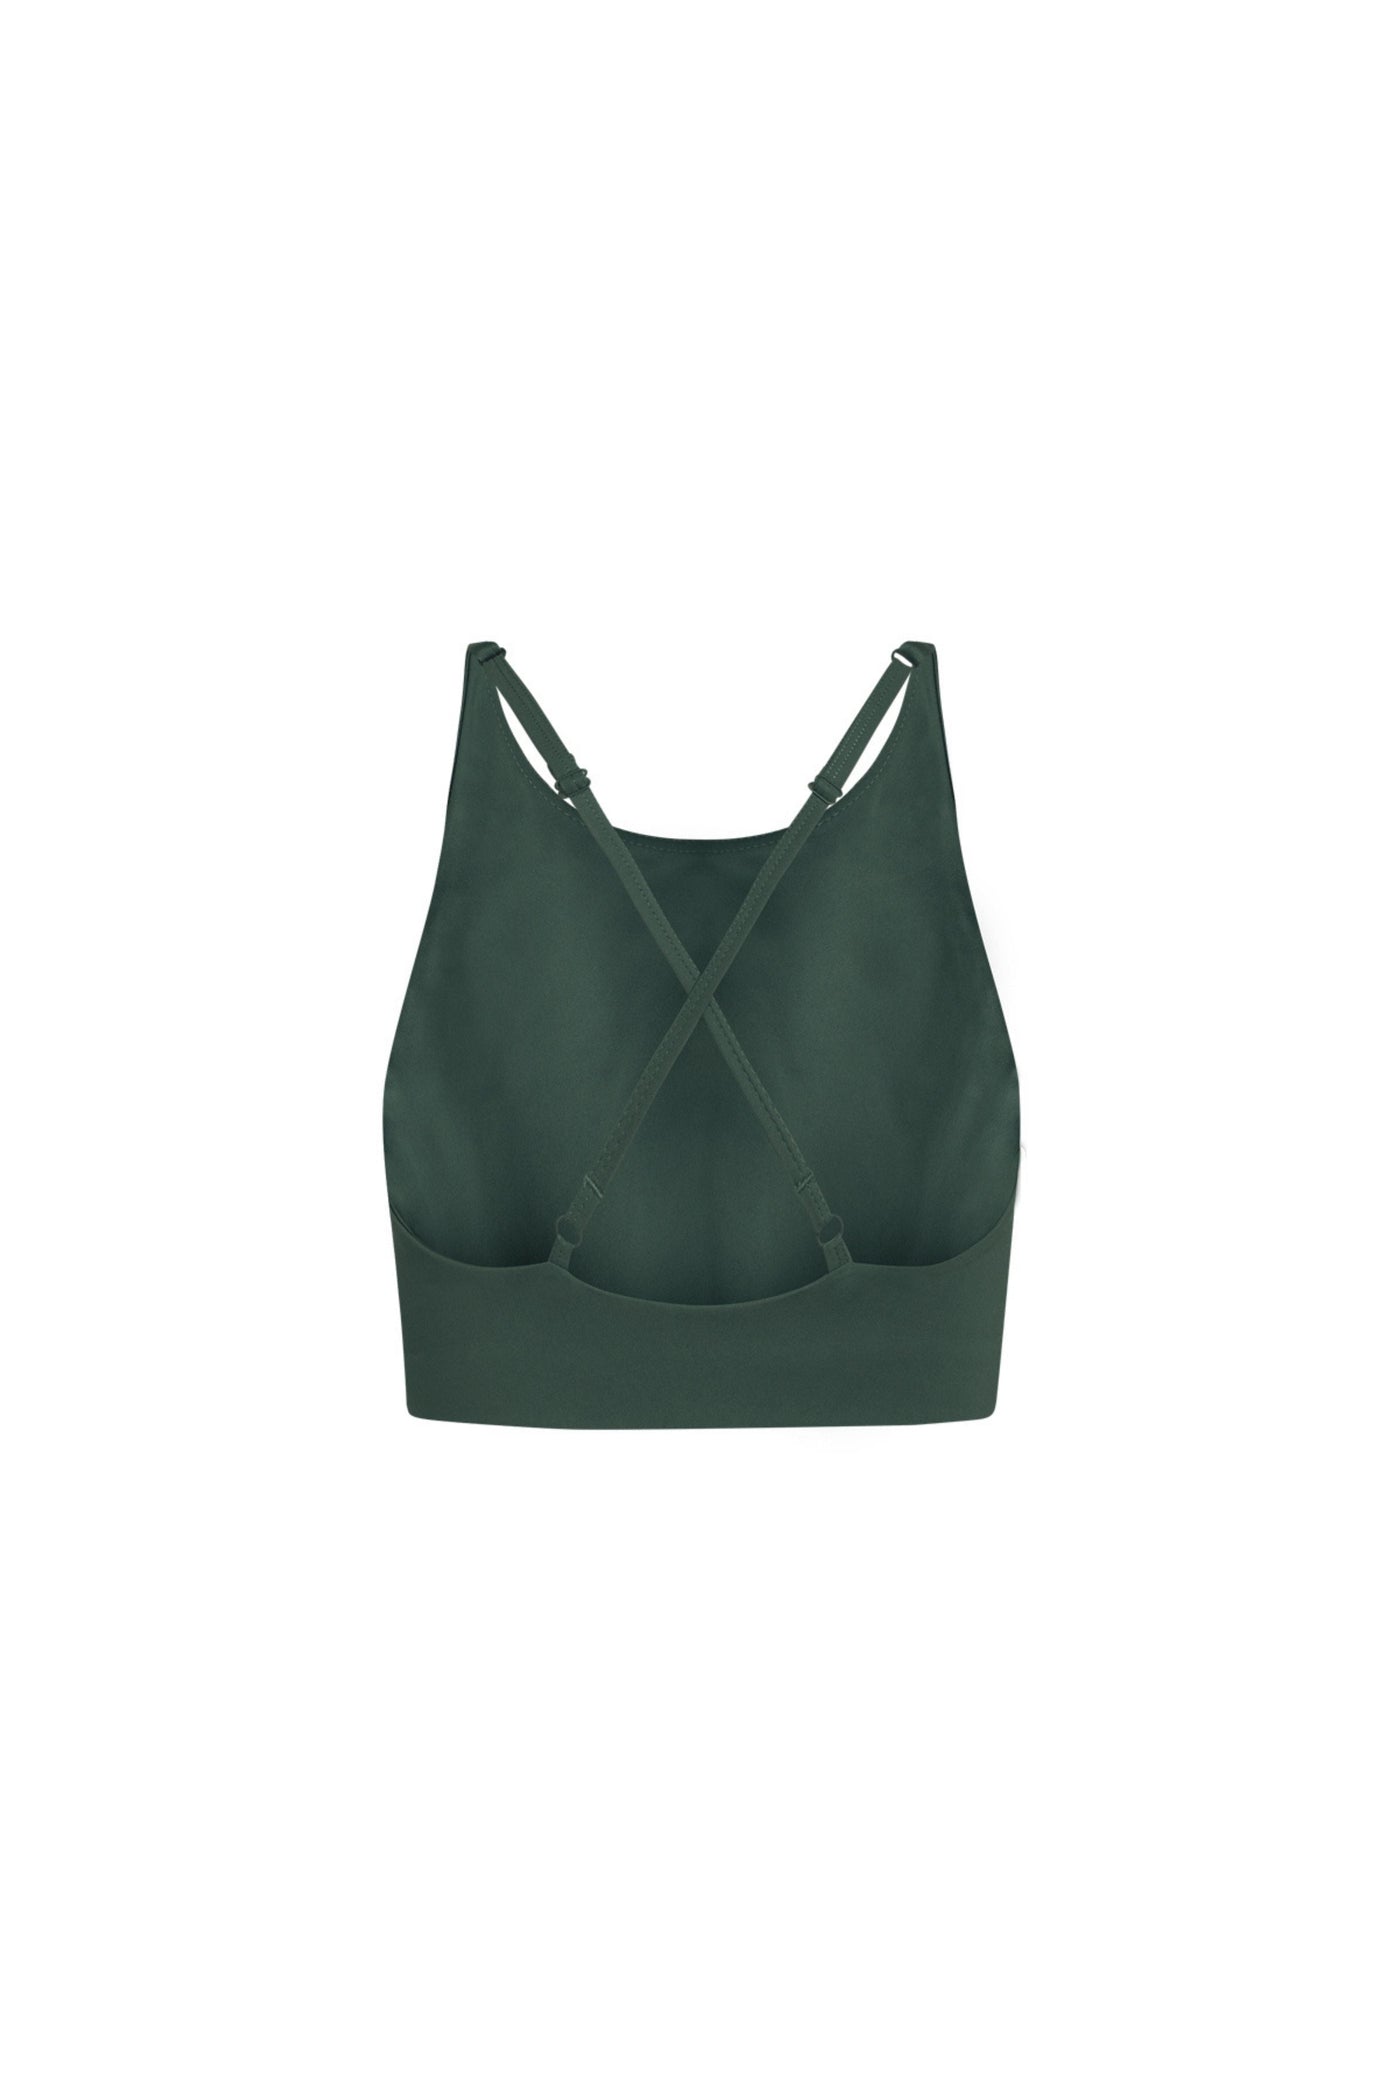 Girlfriend Collective Topanga in Moss-Womens-Ohh! By Gum - Shop Sustainable